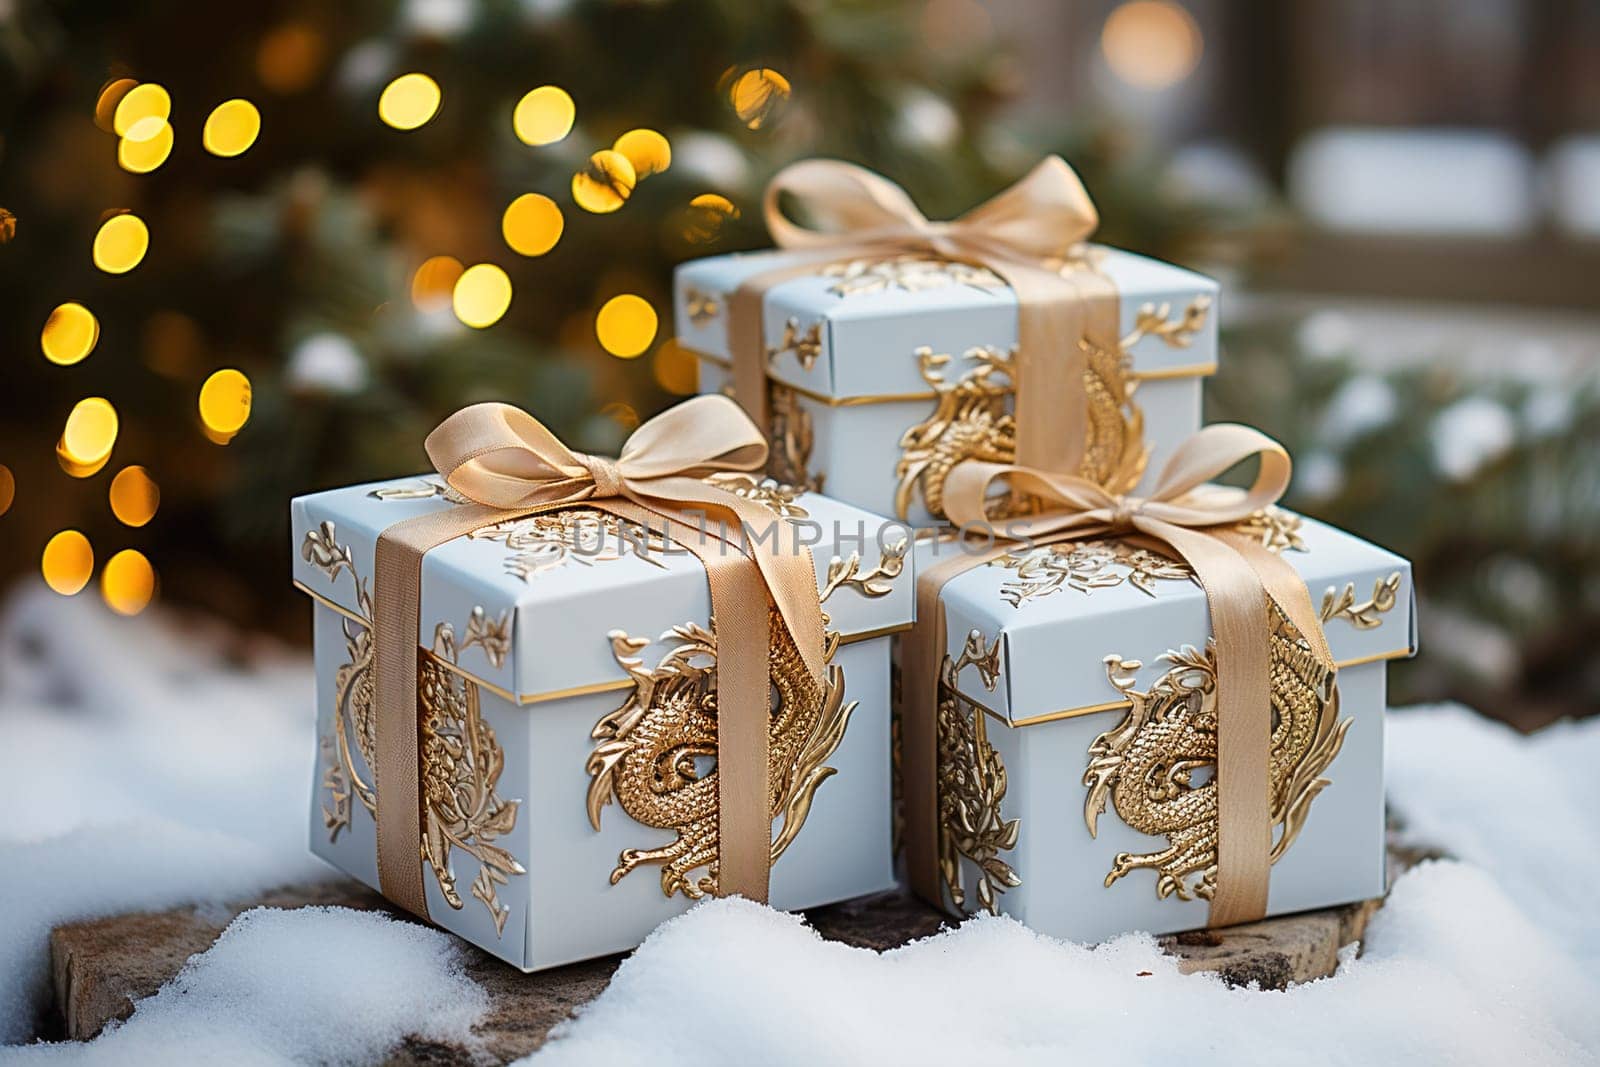 A white gift box with an image of a dragon tied with a yellow ribbon. High quality photo